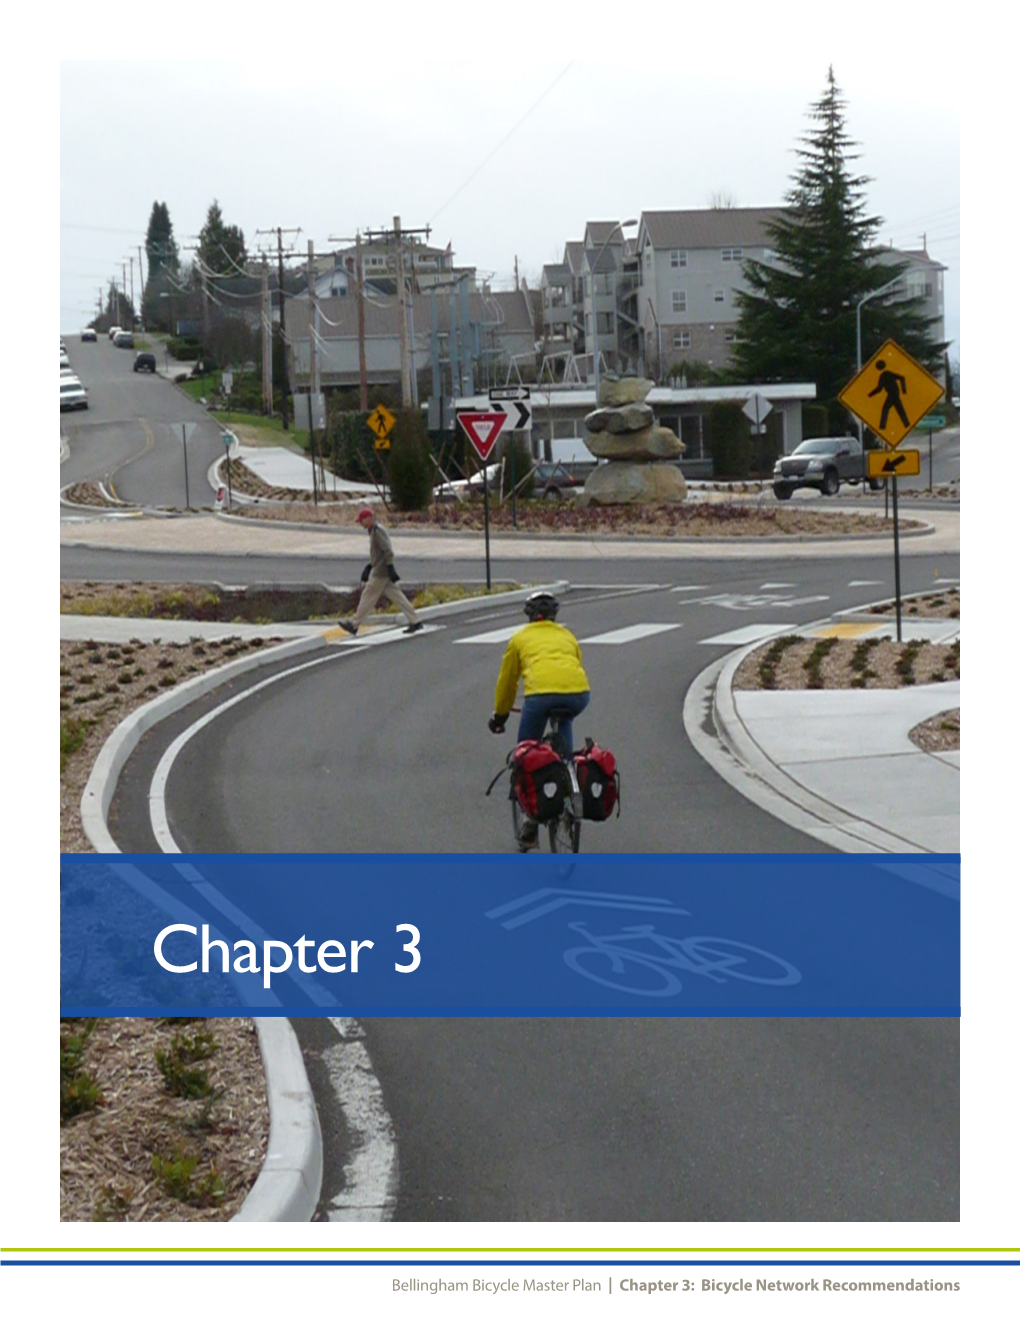 BMP Chapter 3: Bicycle Network Recommendations